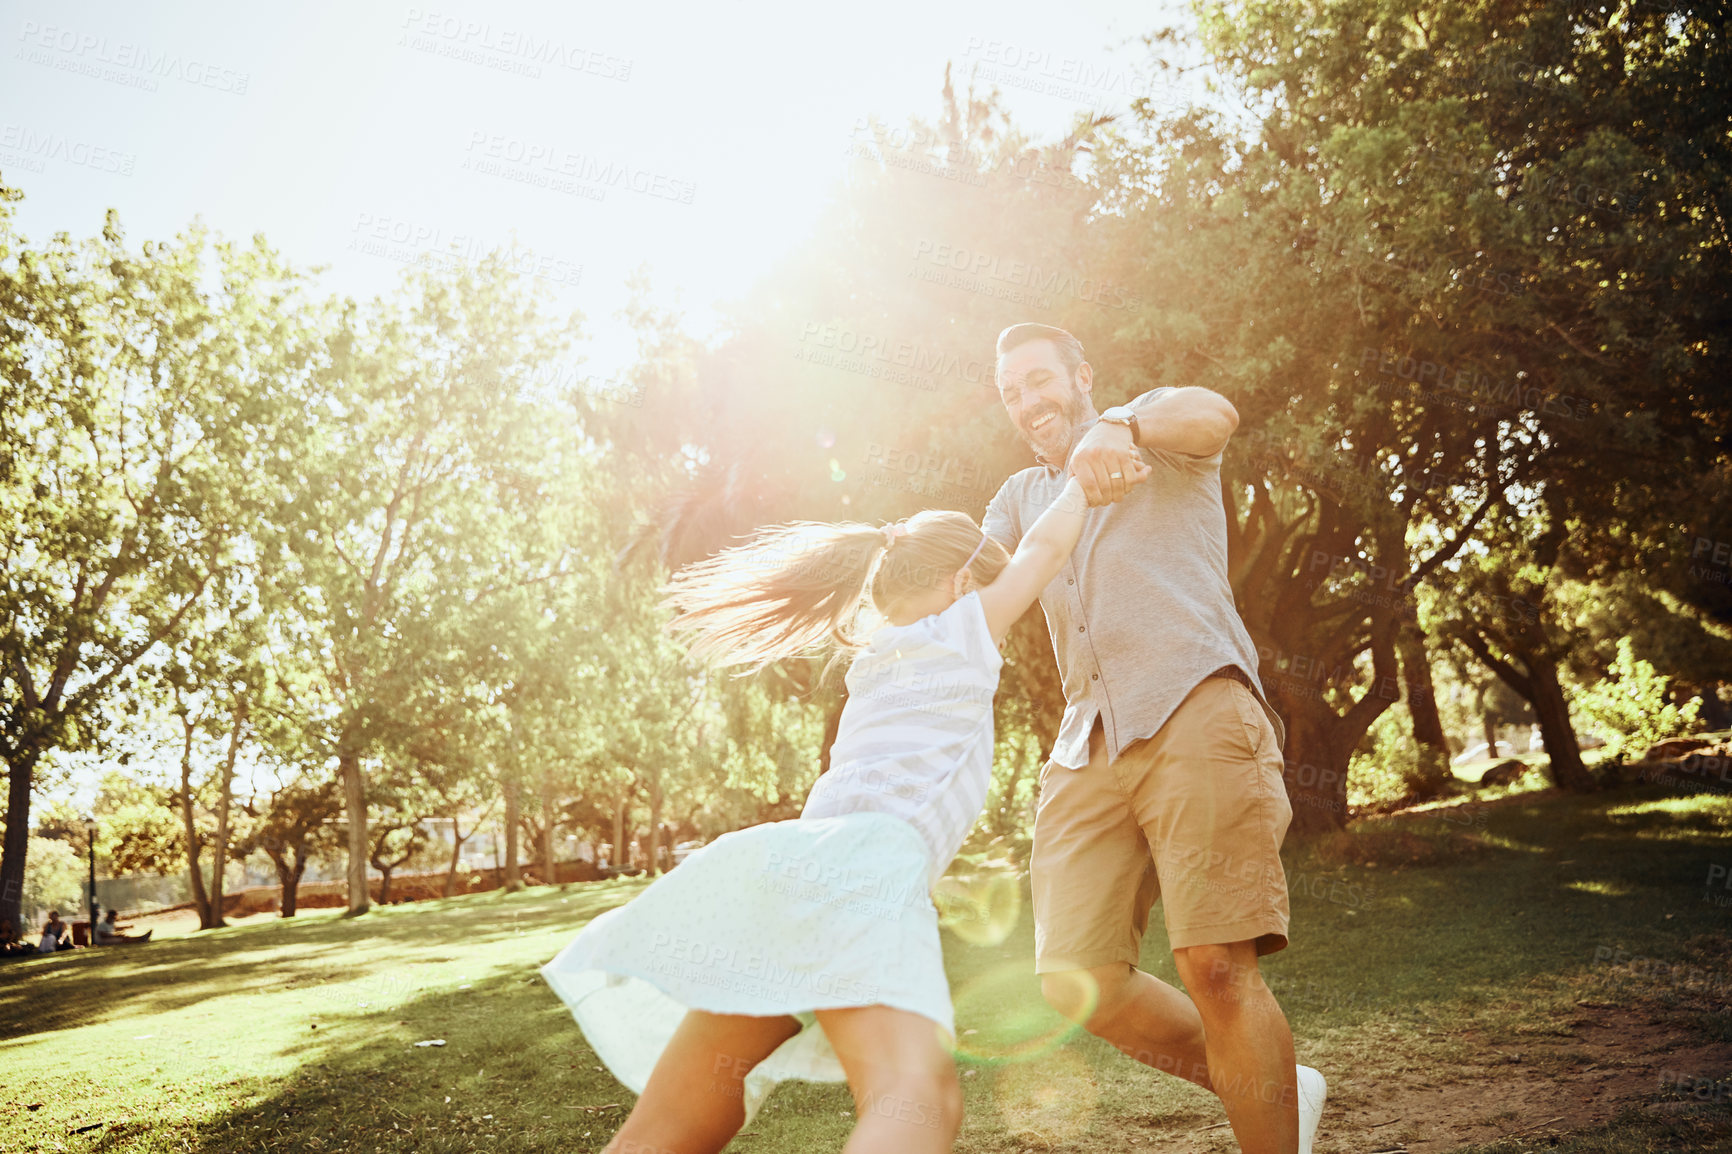 Buy stock photo Shot of an adorable little girl being swung around by her father in the park